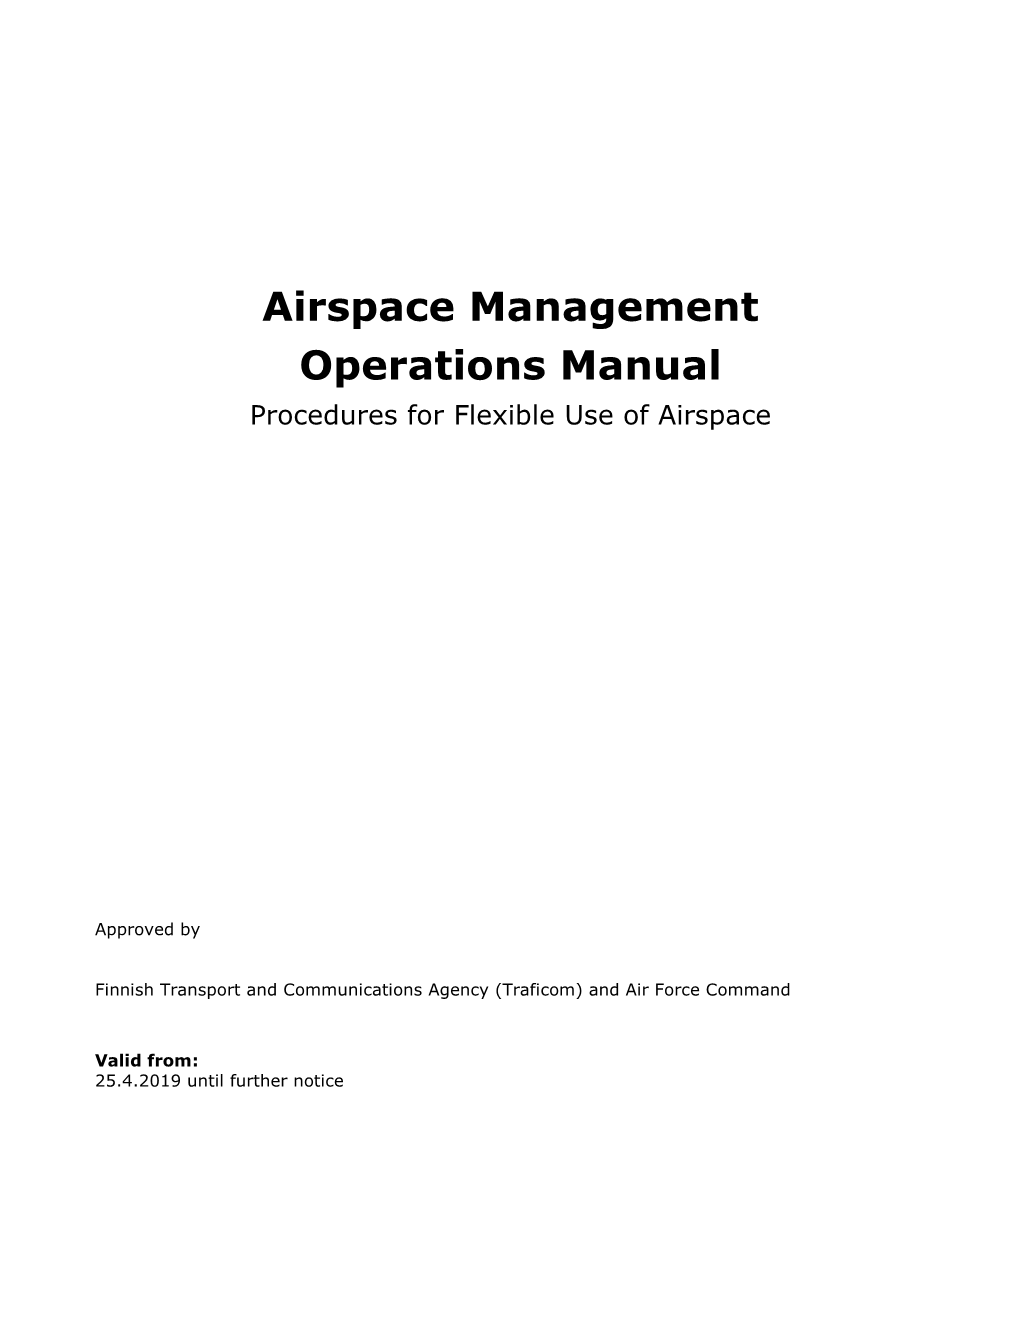 Airspace Management Operations Manual Procedures for Flexible Use of Airspace